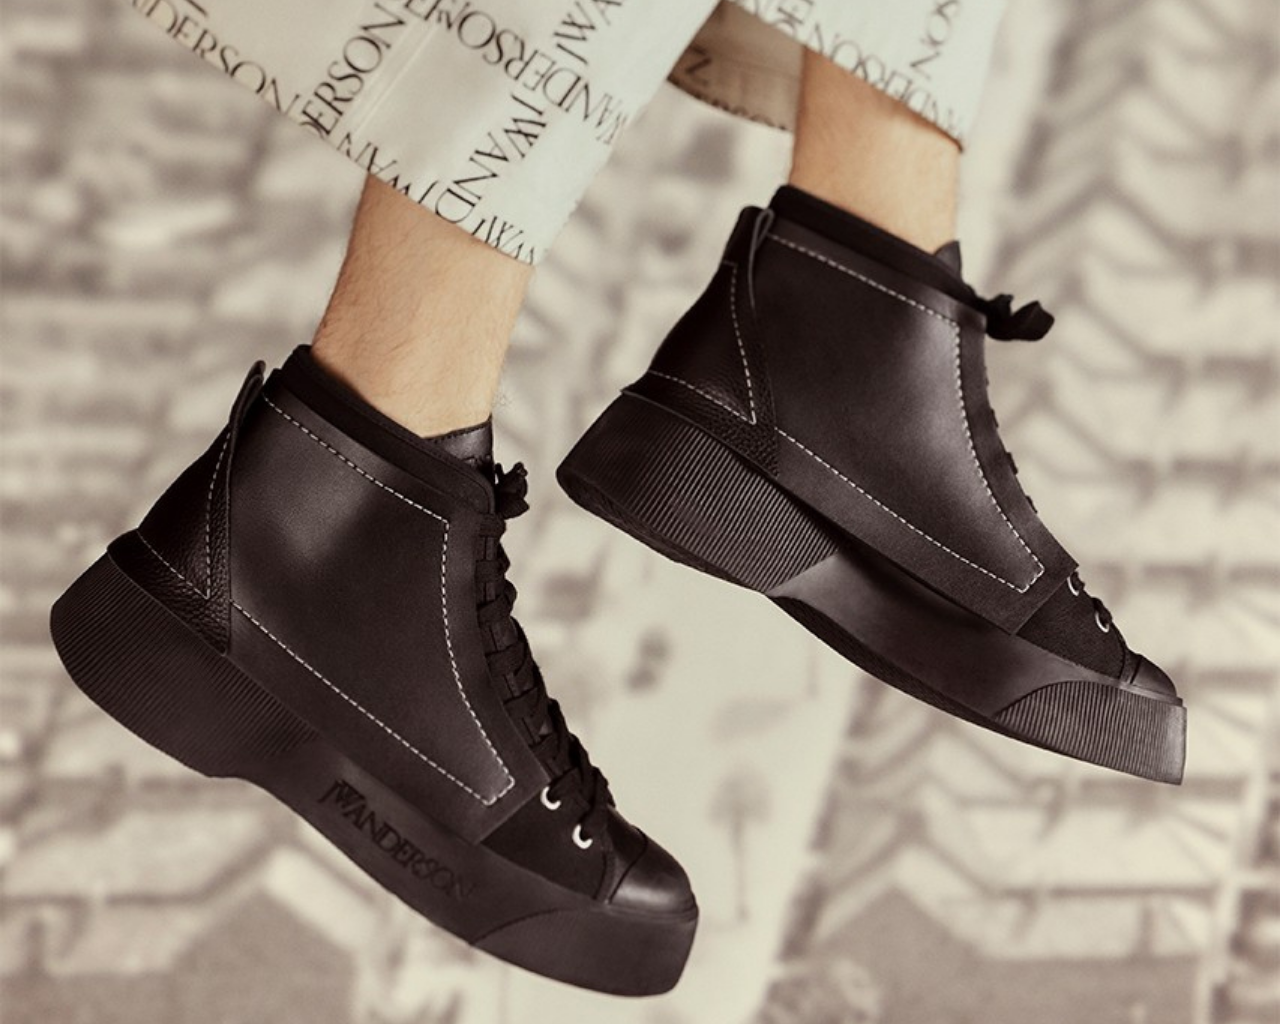 JW Anderson's First-Ever Sneaker: Details, Pics - Grazia